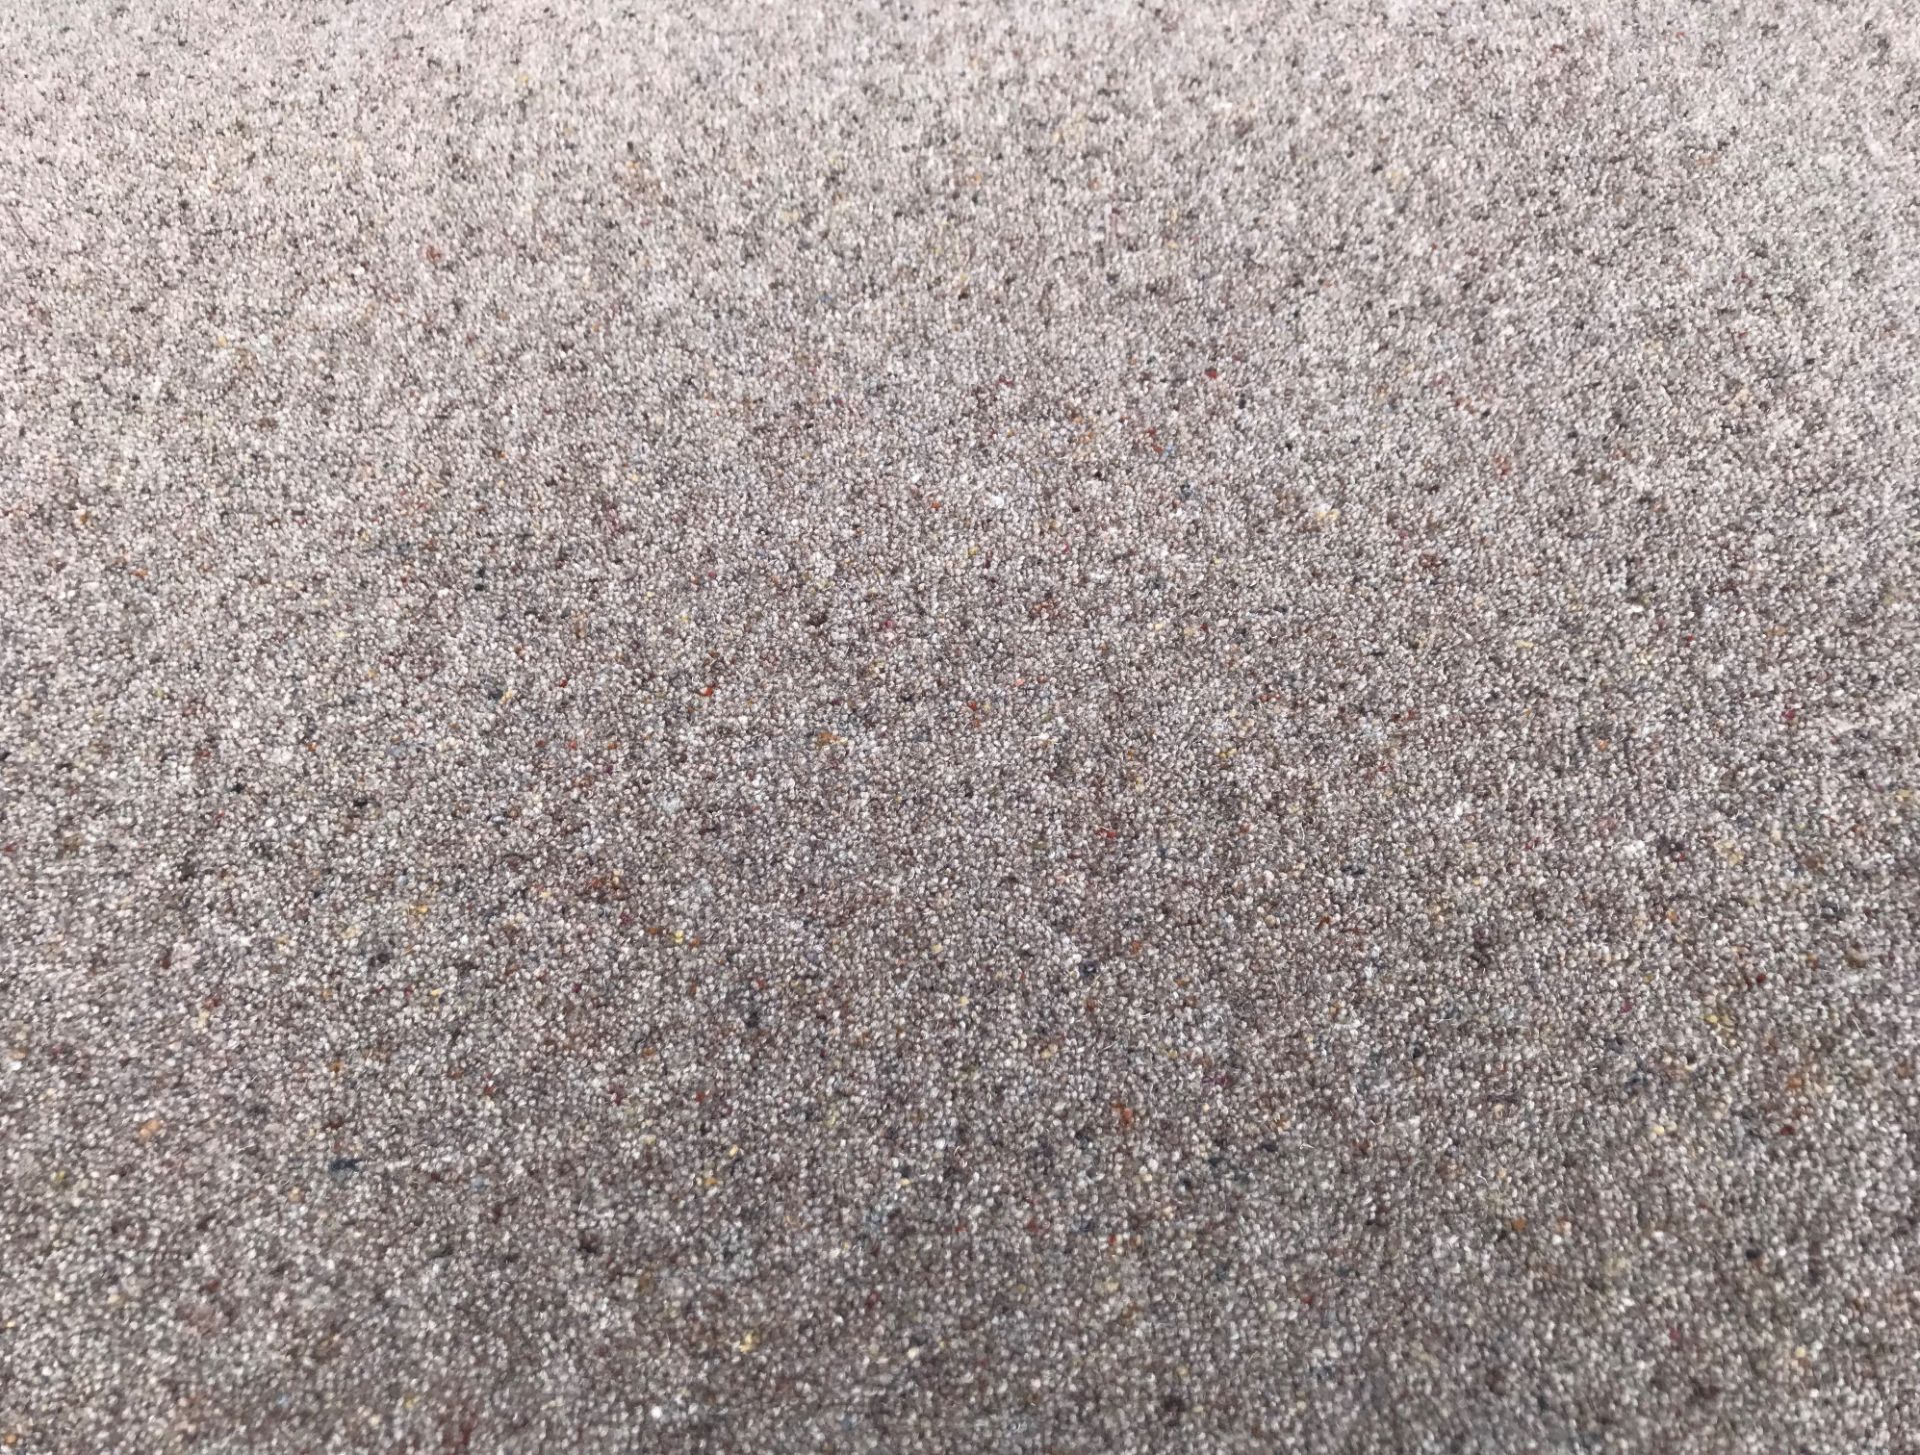 1 x Cormar Carpet Co - Natural Berber Twist Deluxe - Colour Rustic Clay - 25X4 Meter Roll - Rrp £ - Image 3 of 4